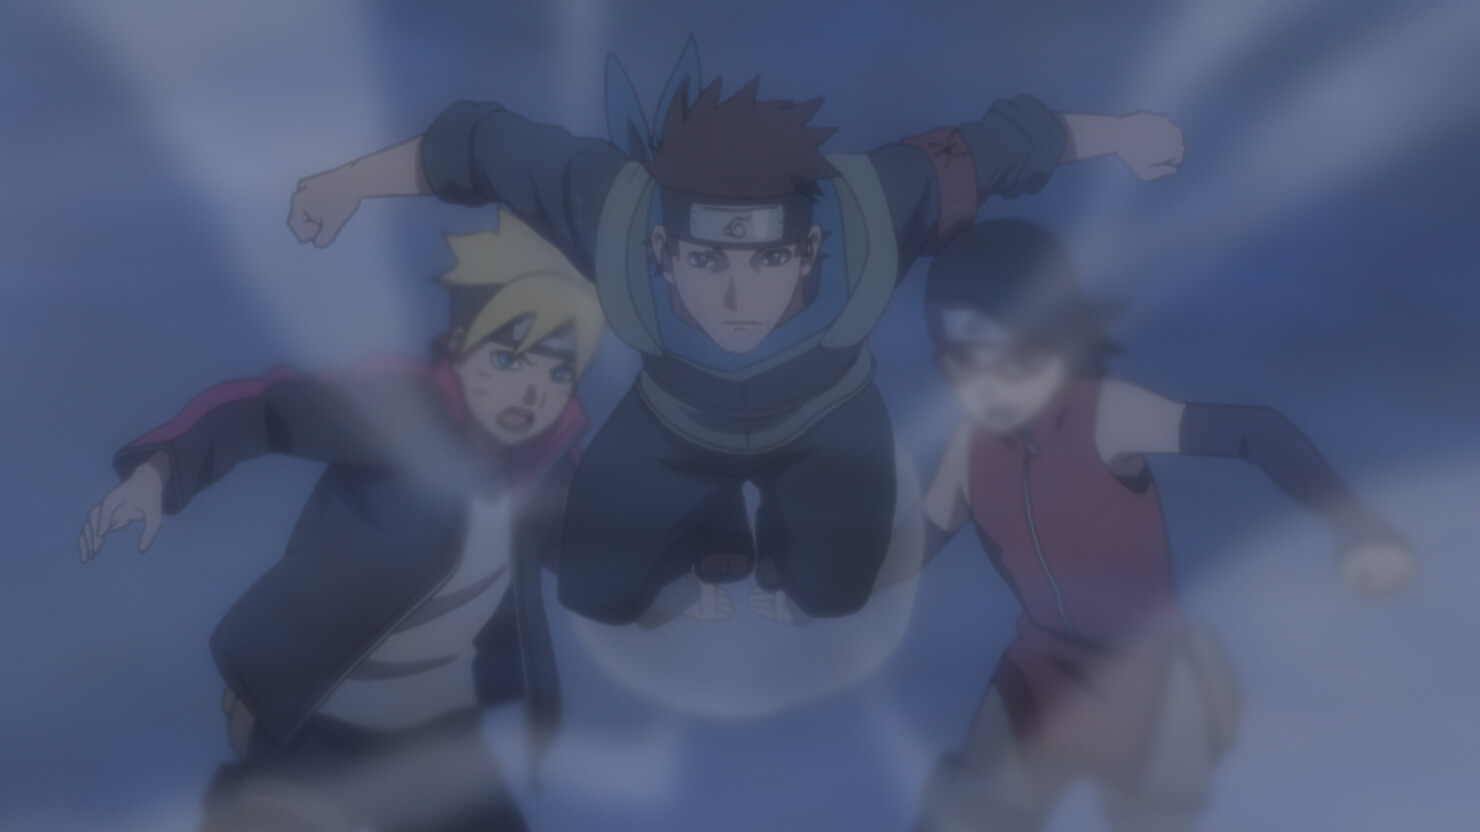 New Team 7 Embarks on Rescue Mission in Latest Boruto Blu-ray!